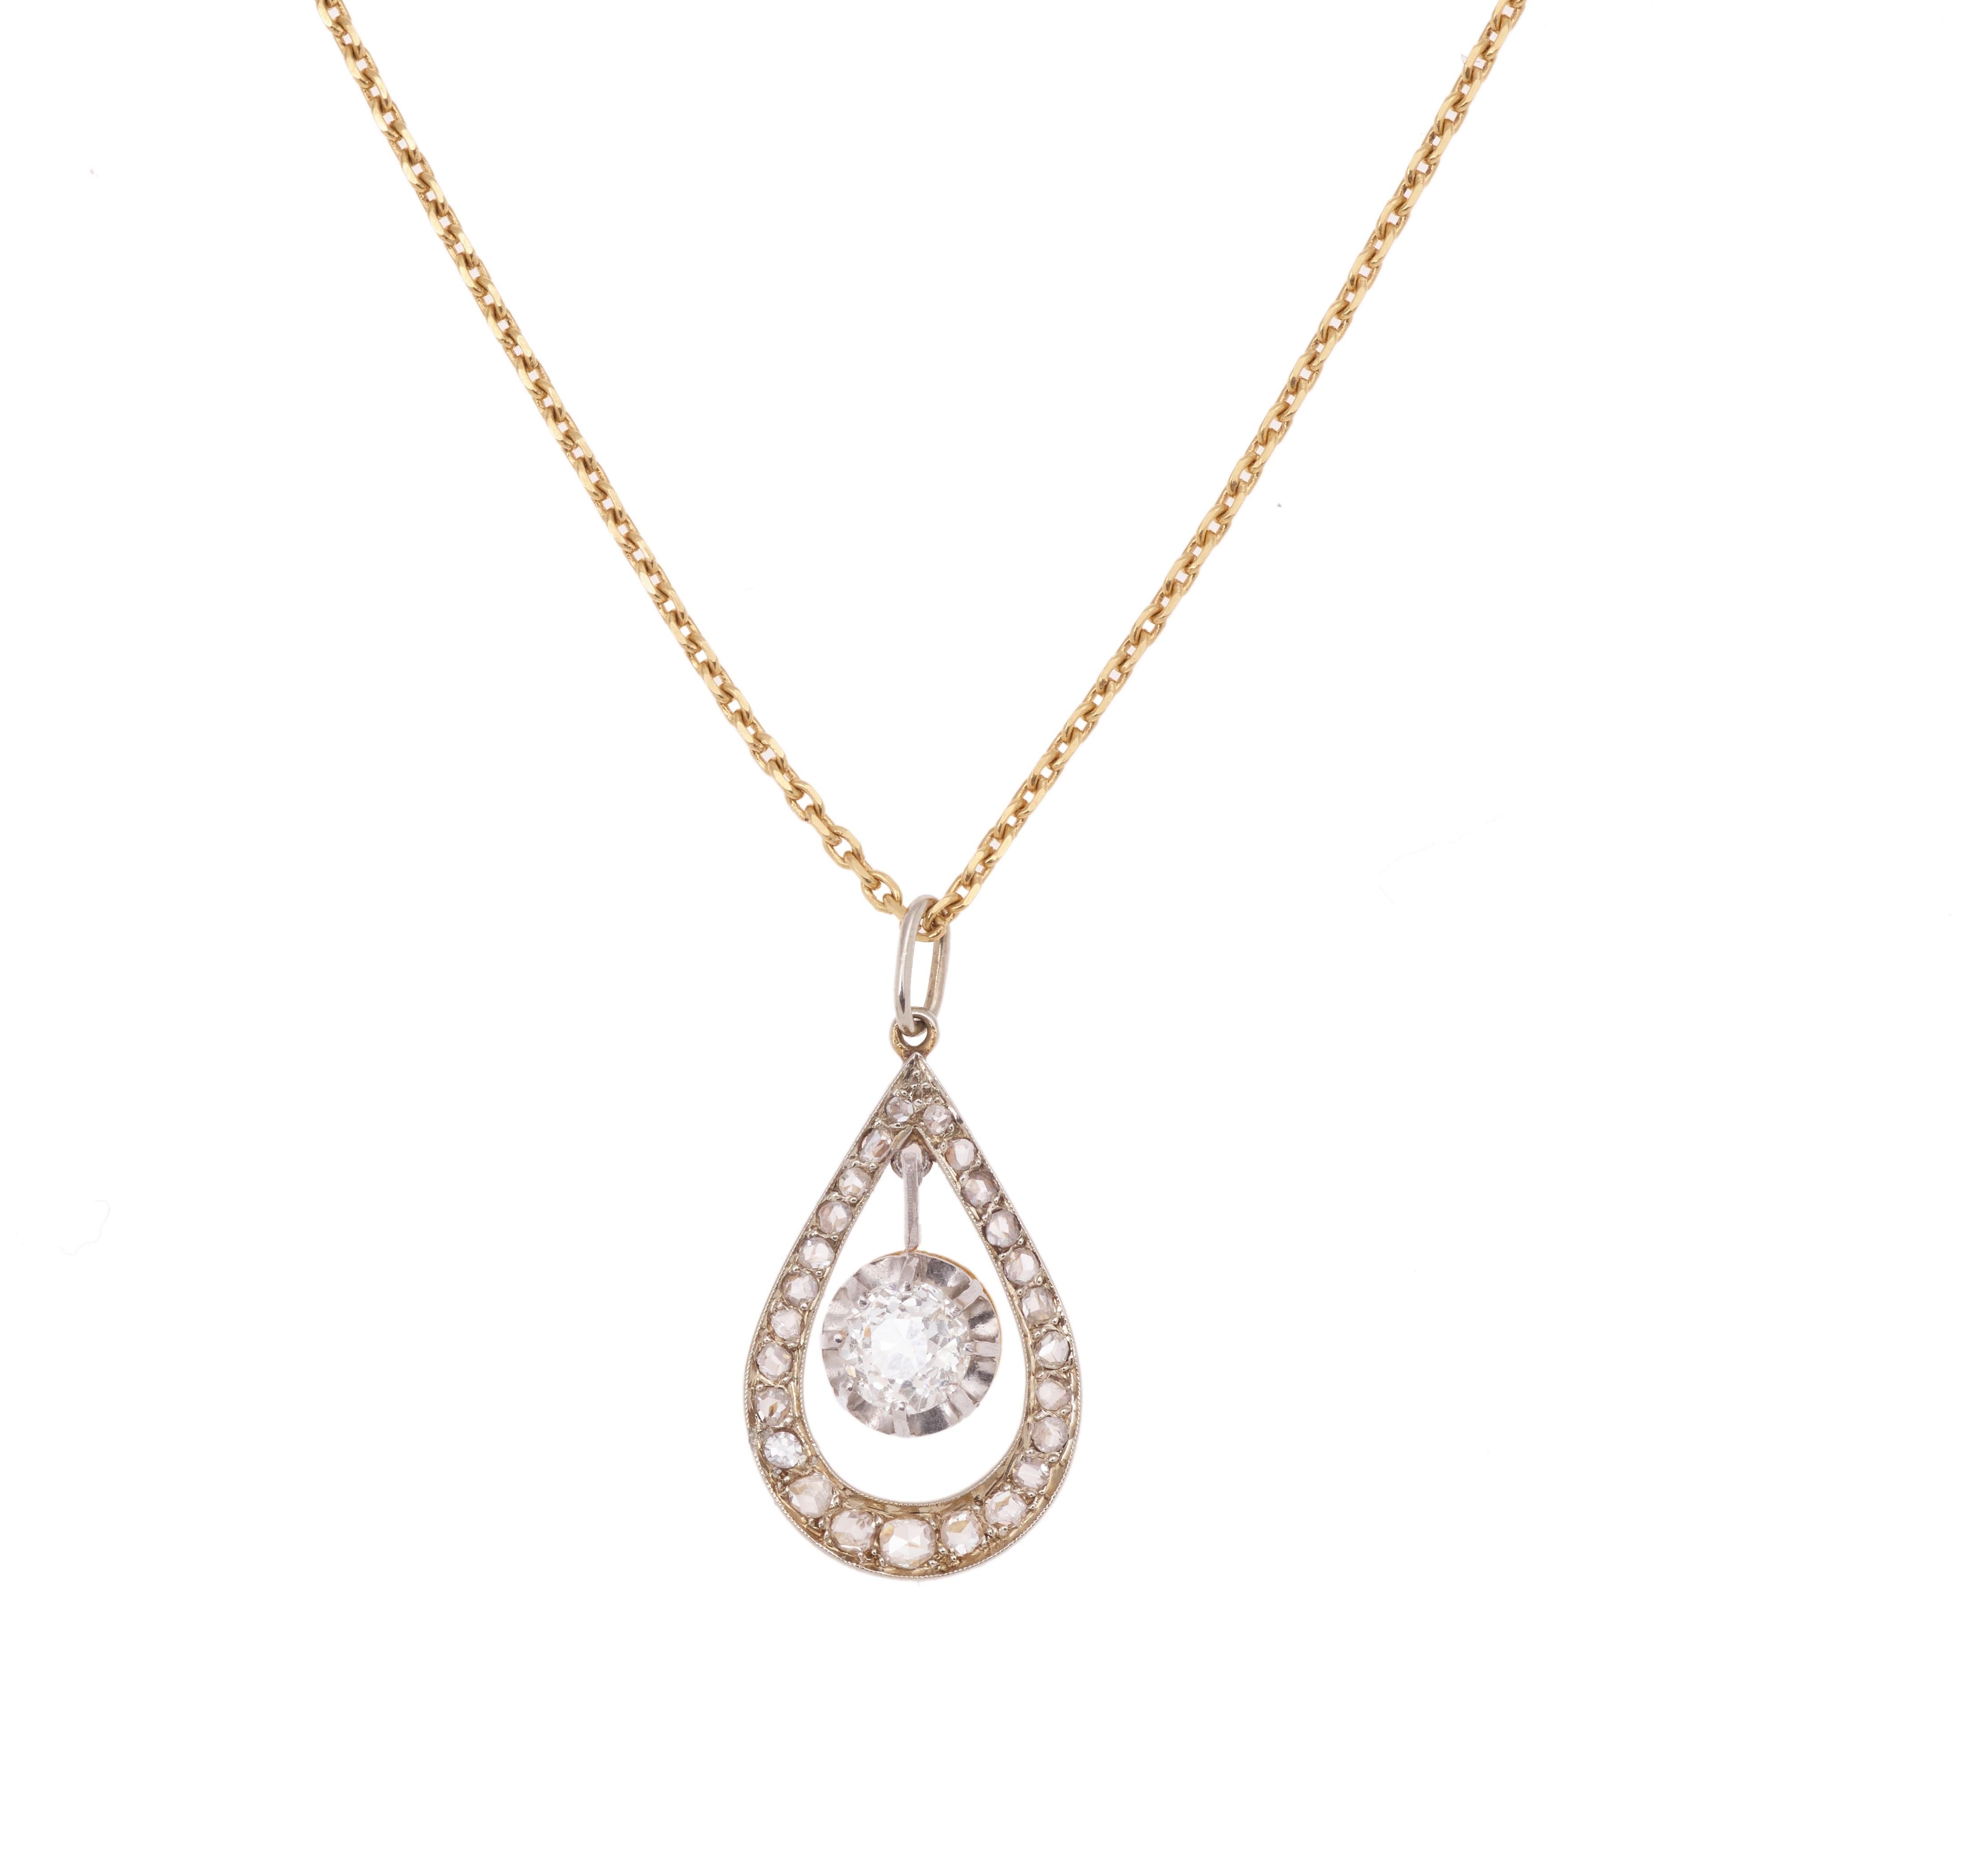 Beautiful platinum and yellow gold pendant paved with rose cut diamonds and set with a 0.50 carats old cut central diamond.

Weight of the central diamond: 0.50 carats
Color H/I
Clarity SI

Paving weight: 0.27 carats

Total diamond weight: 0.77